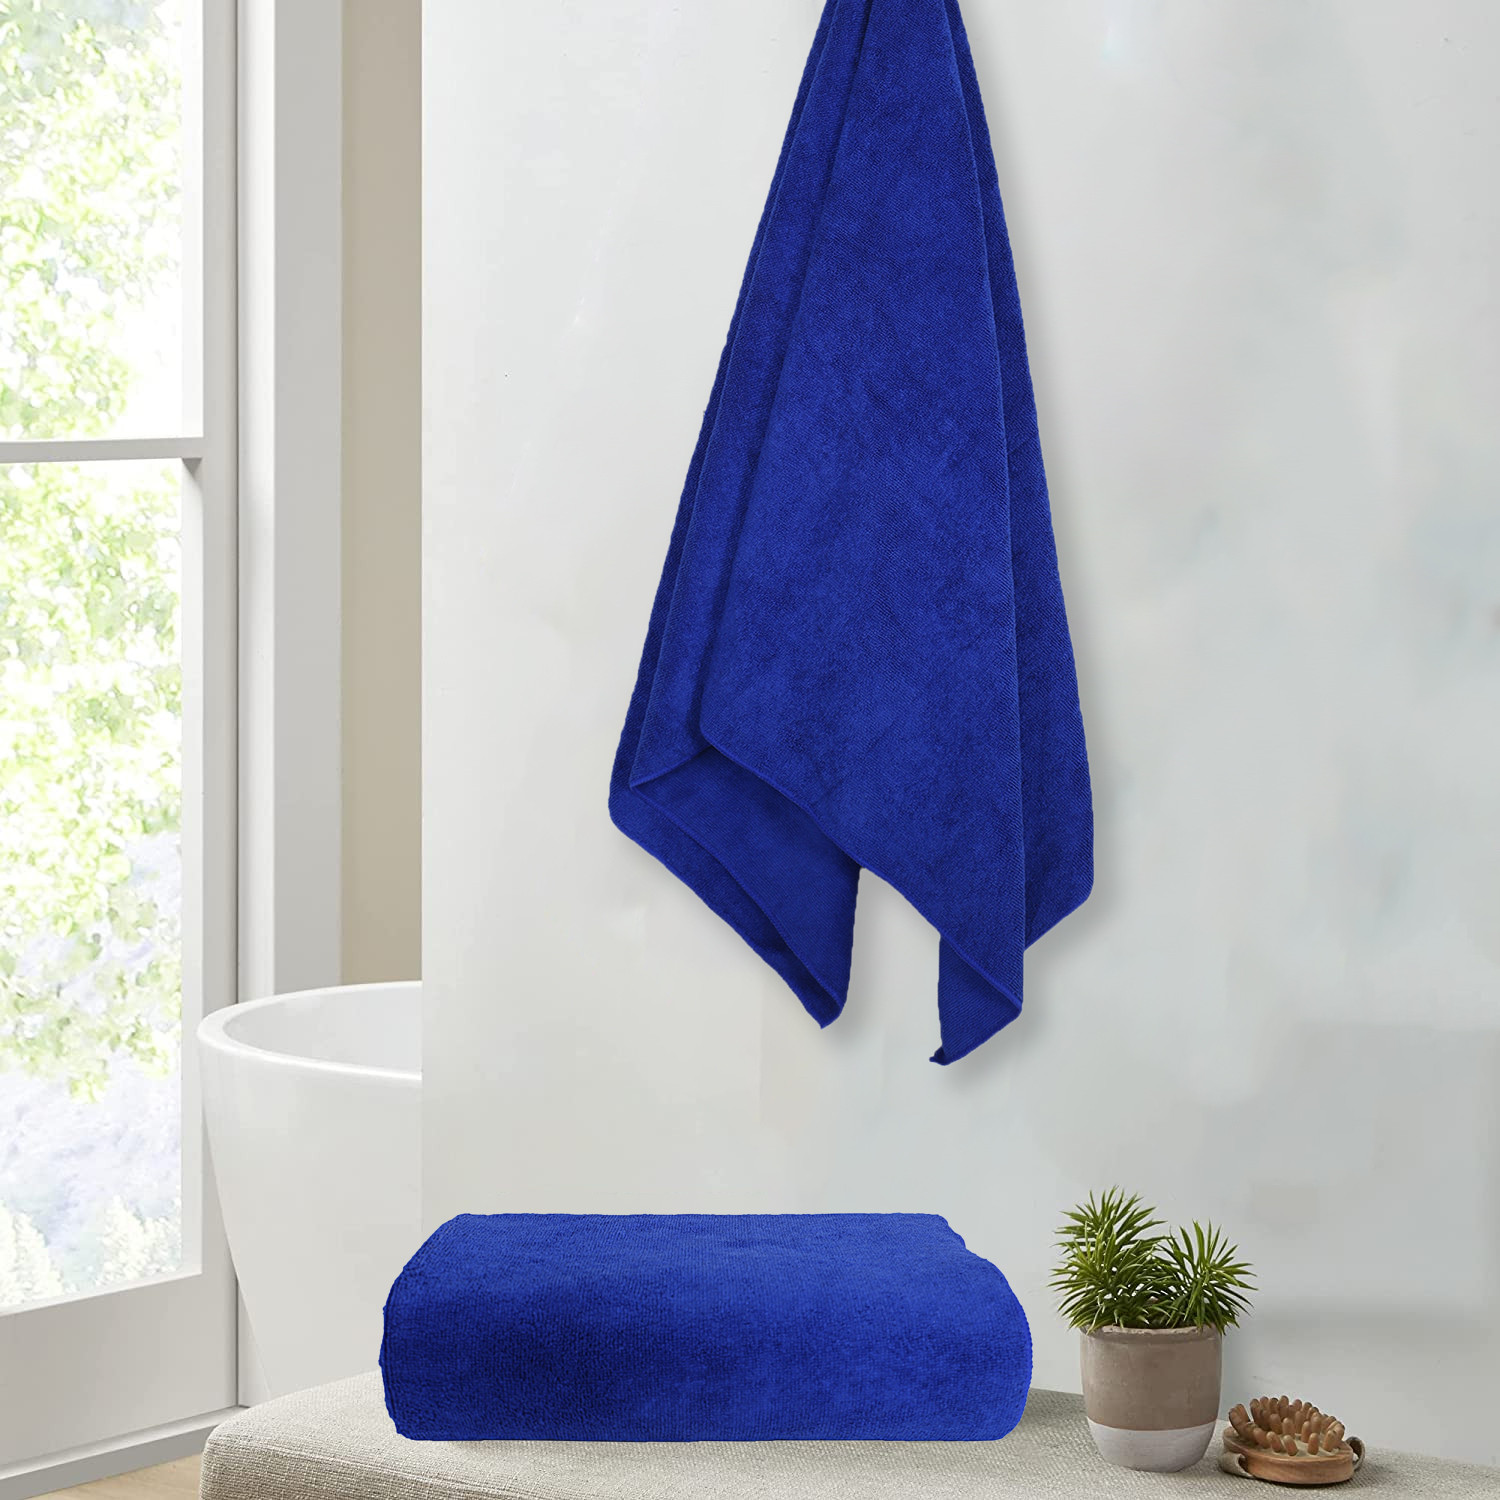 Kuber Industries Lightweight Bath Towel|Soft Absorbent Cotton Anti-Bacterial & Quick Dry Shower Towel For Bathroom,Hotel,Gym,Travel (Blue)